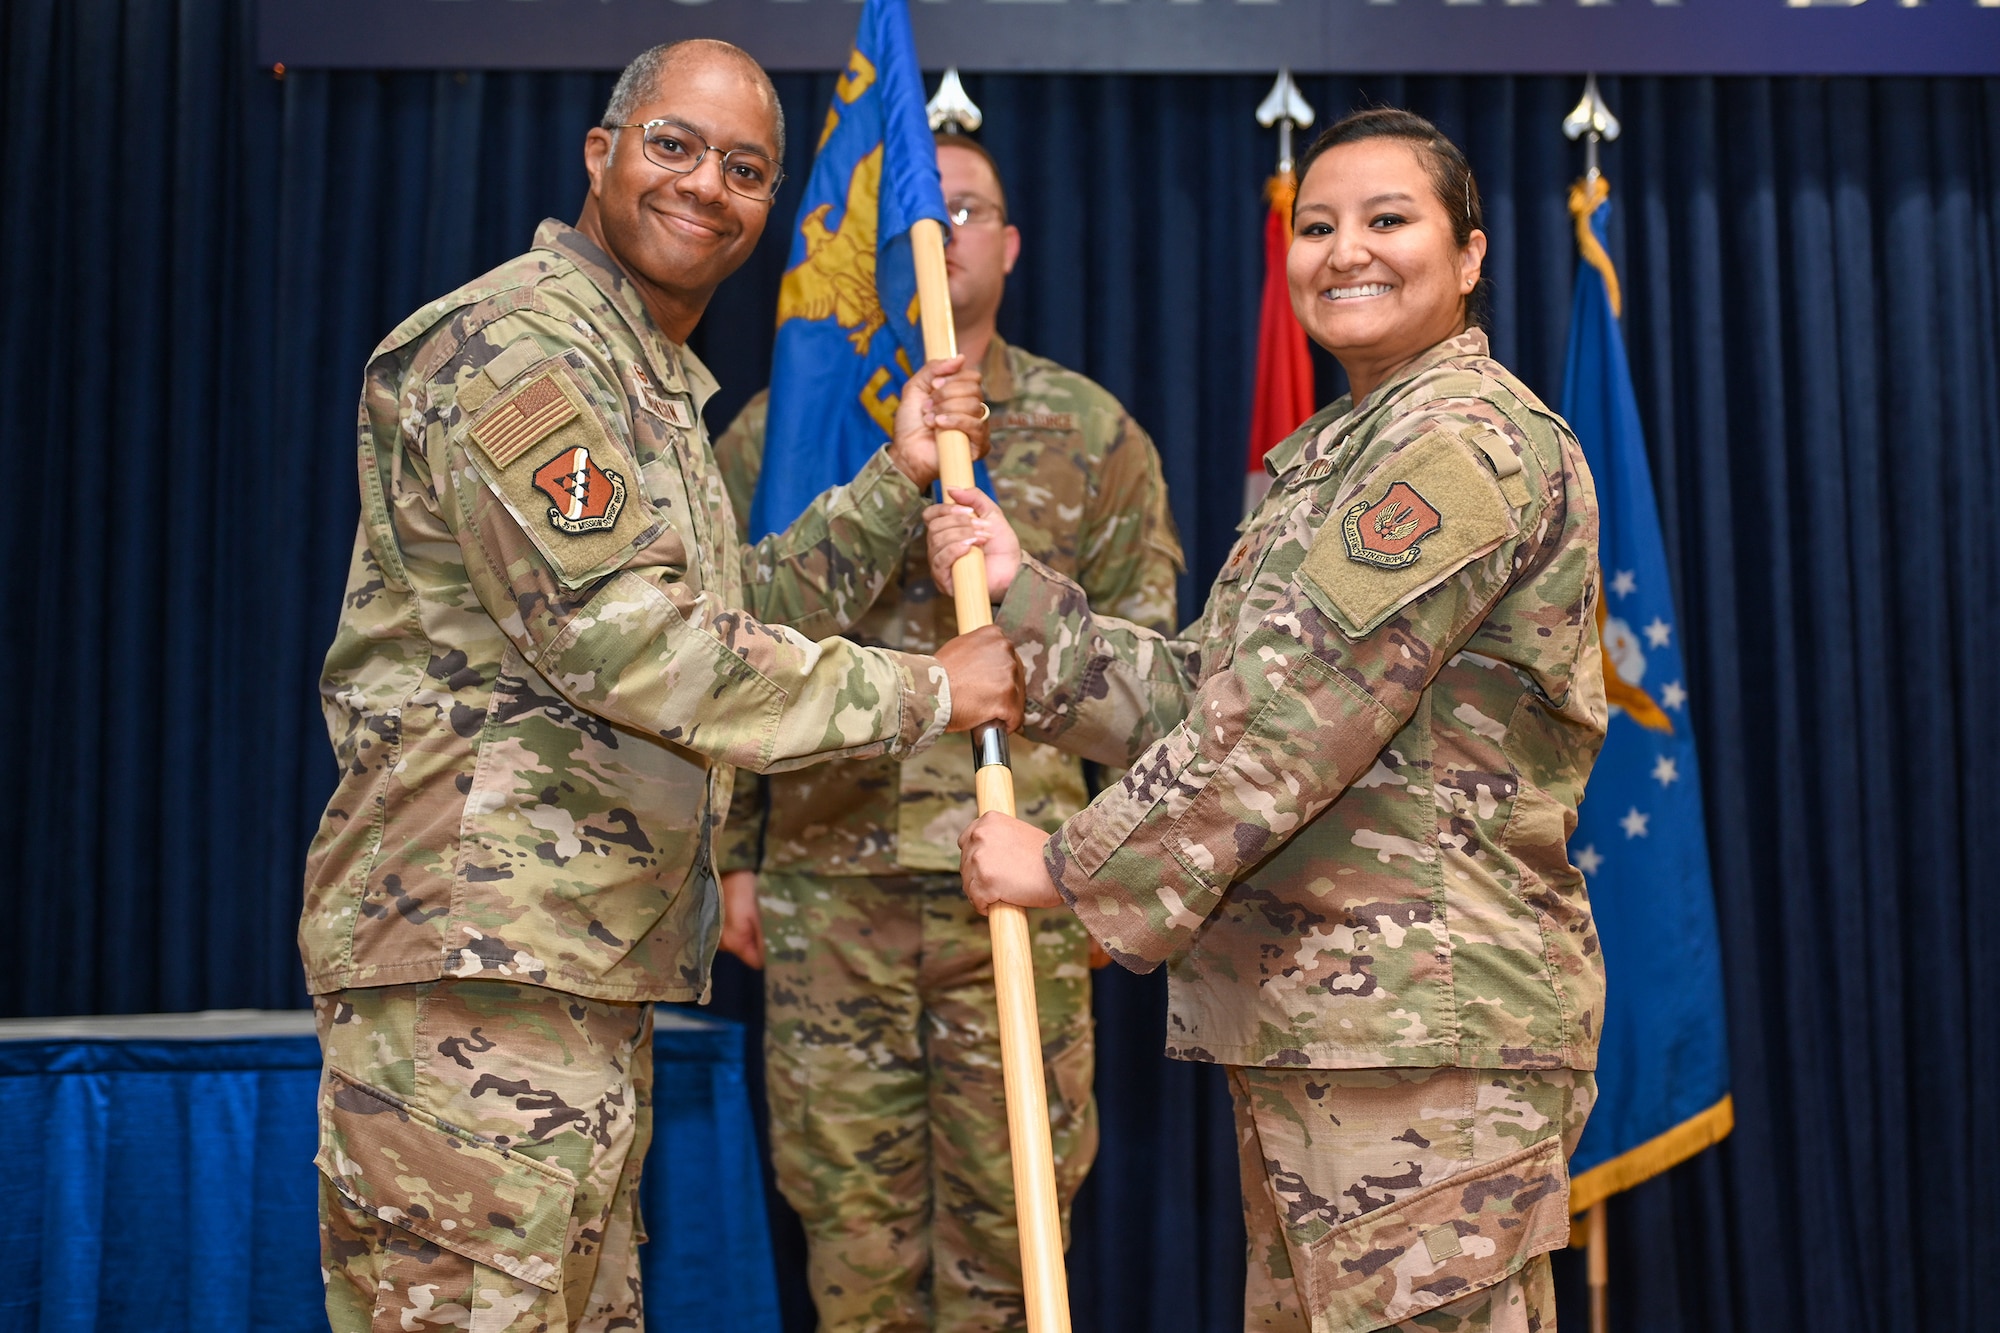 Maj. Claudia Santos (right), incoming 39th Force Support Squadron commander, receives the guidon from Col. Christopher Robinson, 39th Mission Support Group commander, during a change of command ceremony at Incirlik Air Base, Turkey, July 15, 2022.